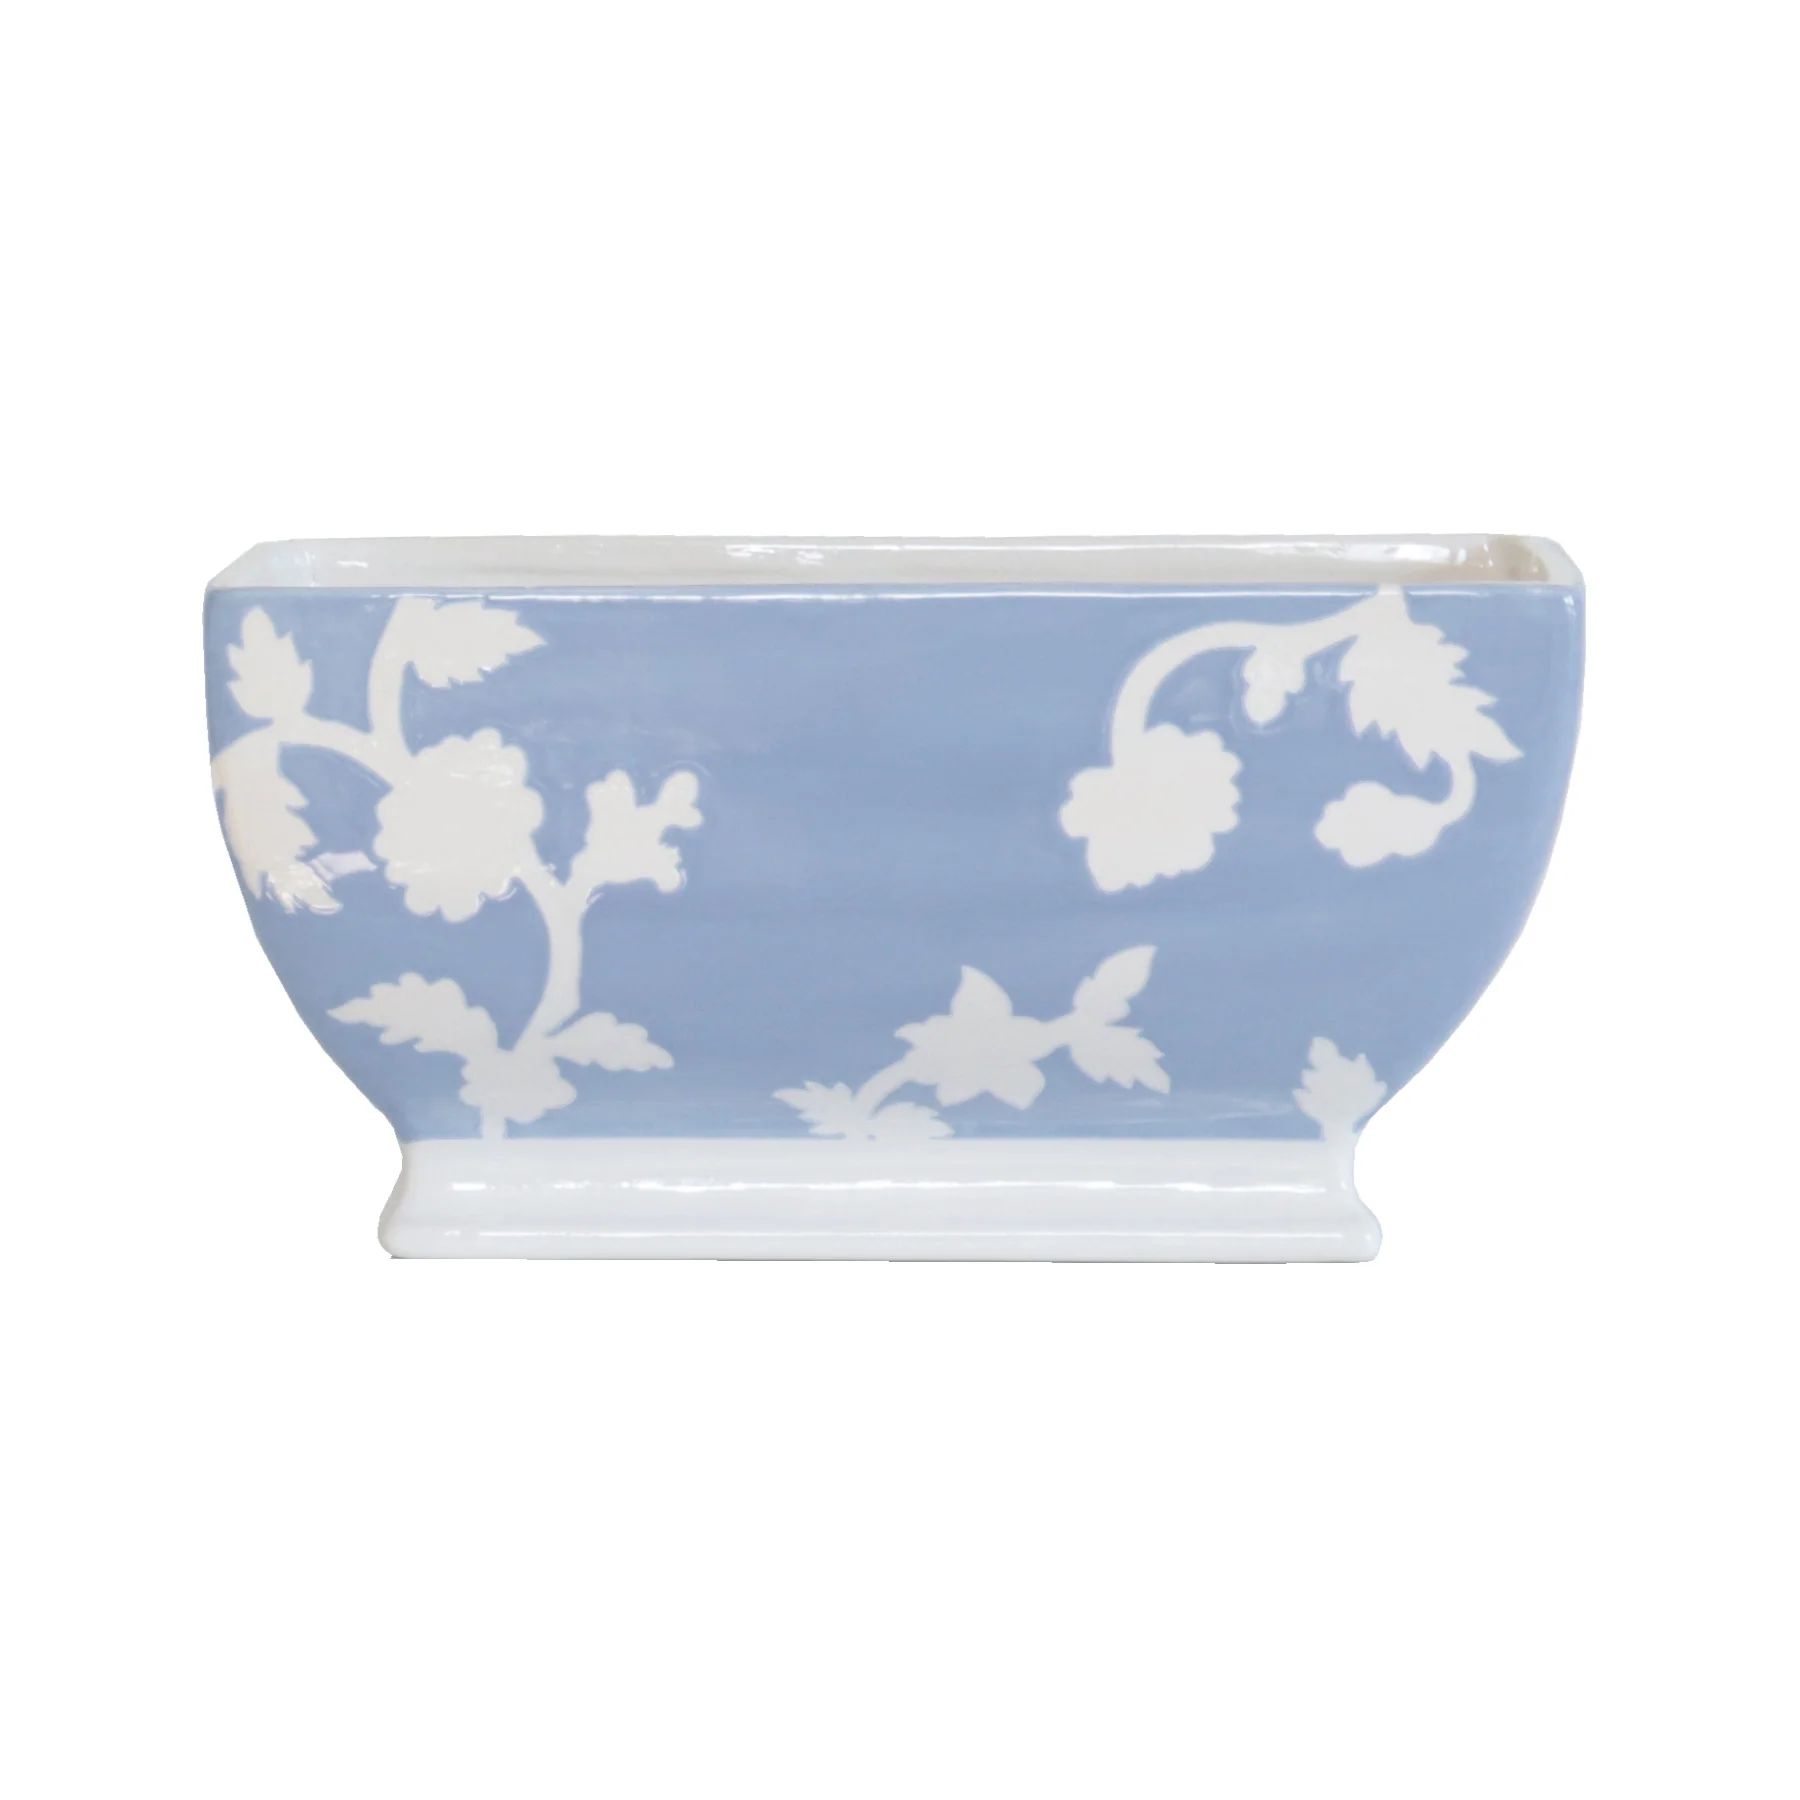 Chinoiserie Dreams Planter | Lo Home by Lauren Haskell Designs